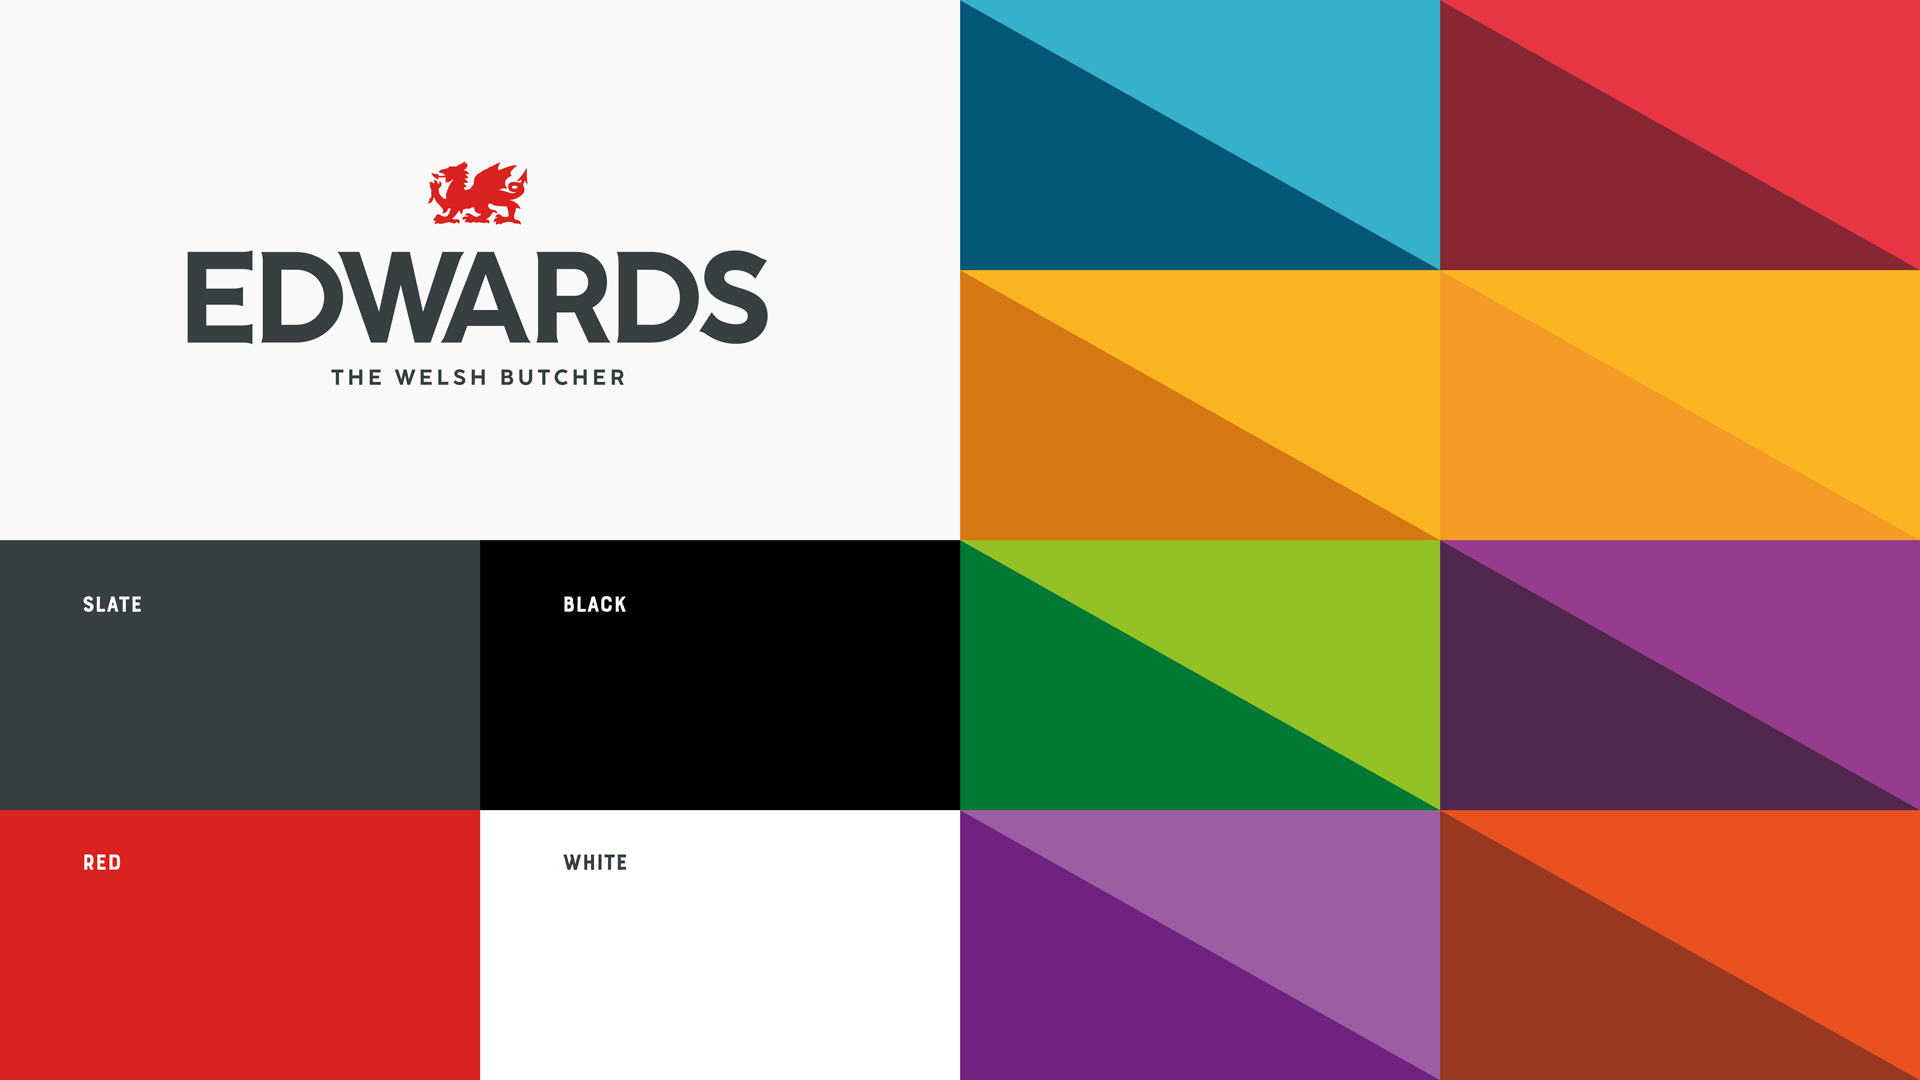 edwards brand guidelines